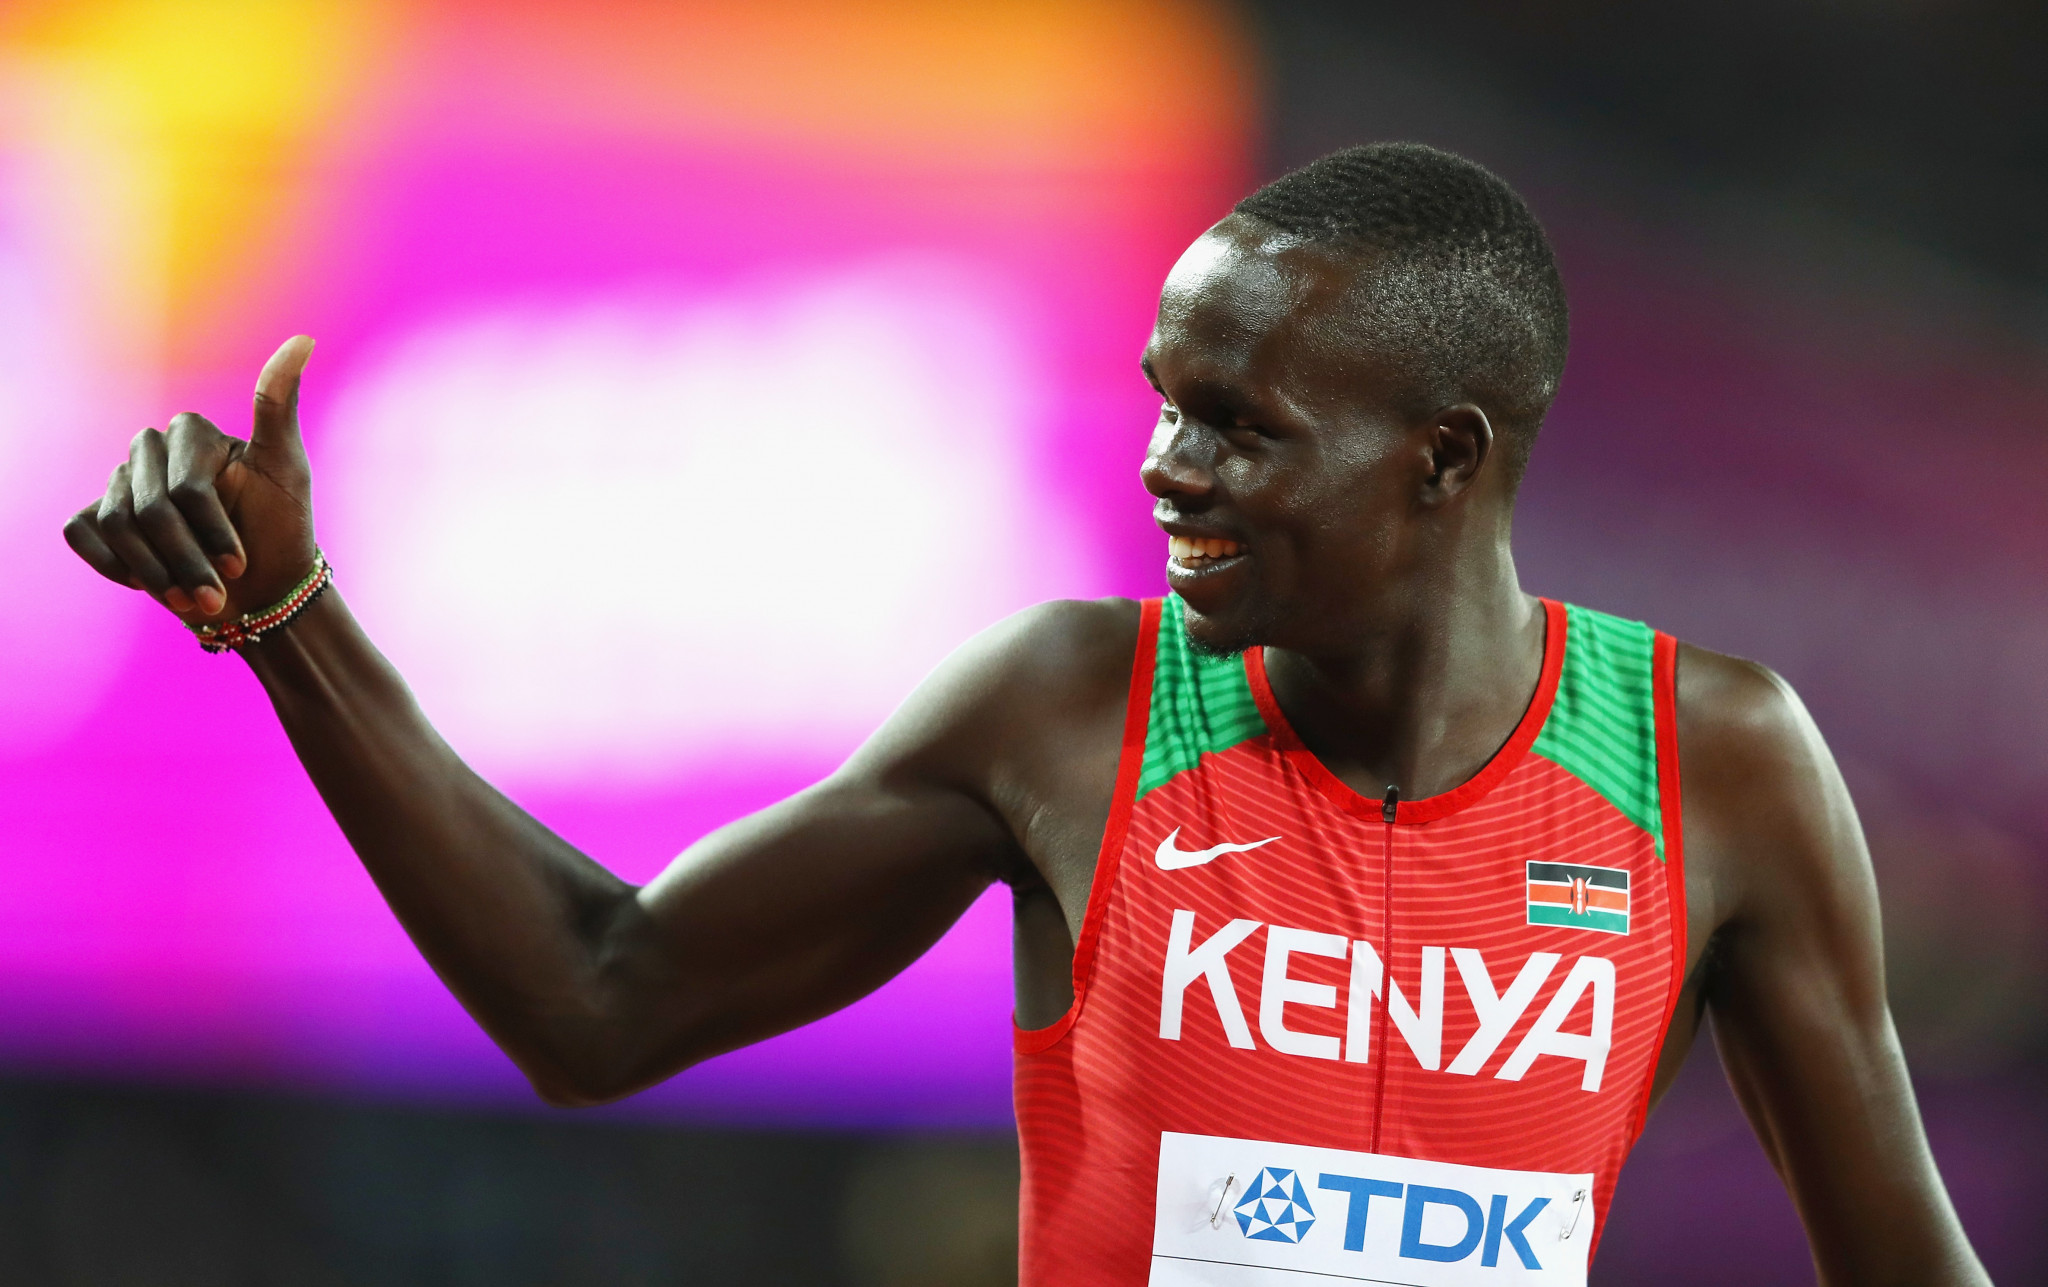 Kipyegon Bett has been banned for four-years ©Getty Images